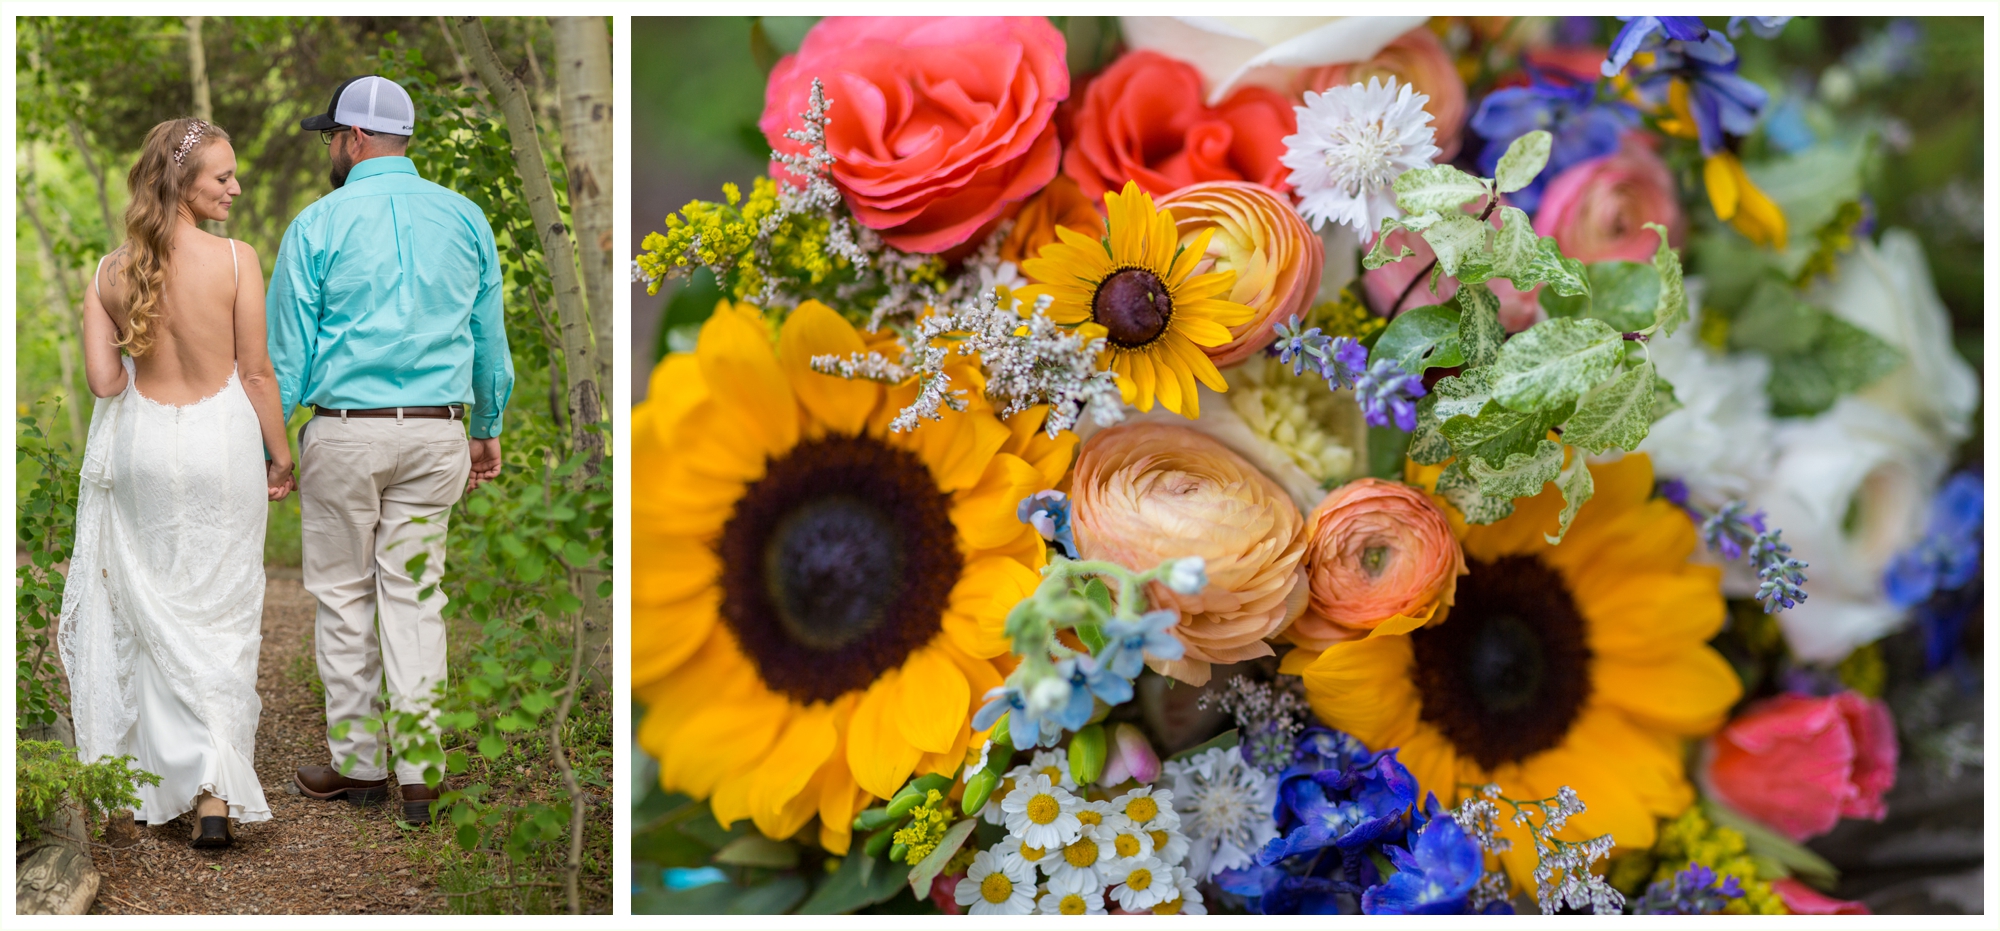 beautiful summer bridal bouquet with sunflowers ranunculous wildflowers and roses. bright and colorful flowers 